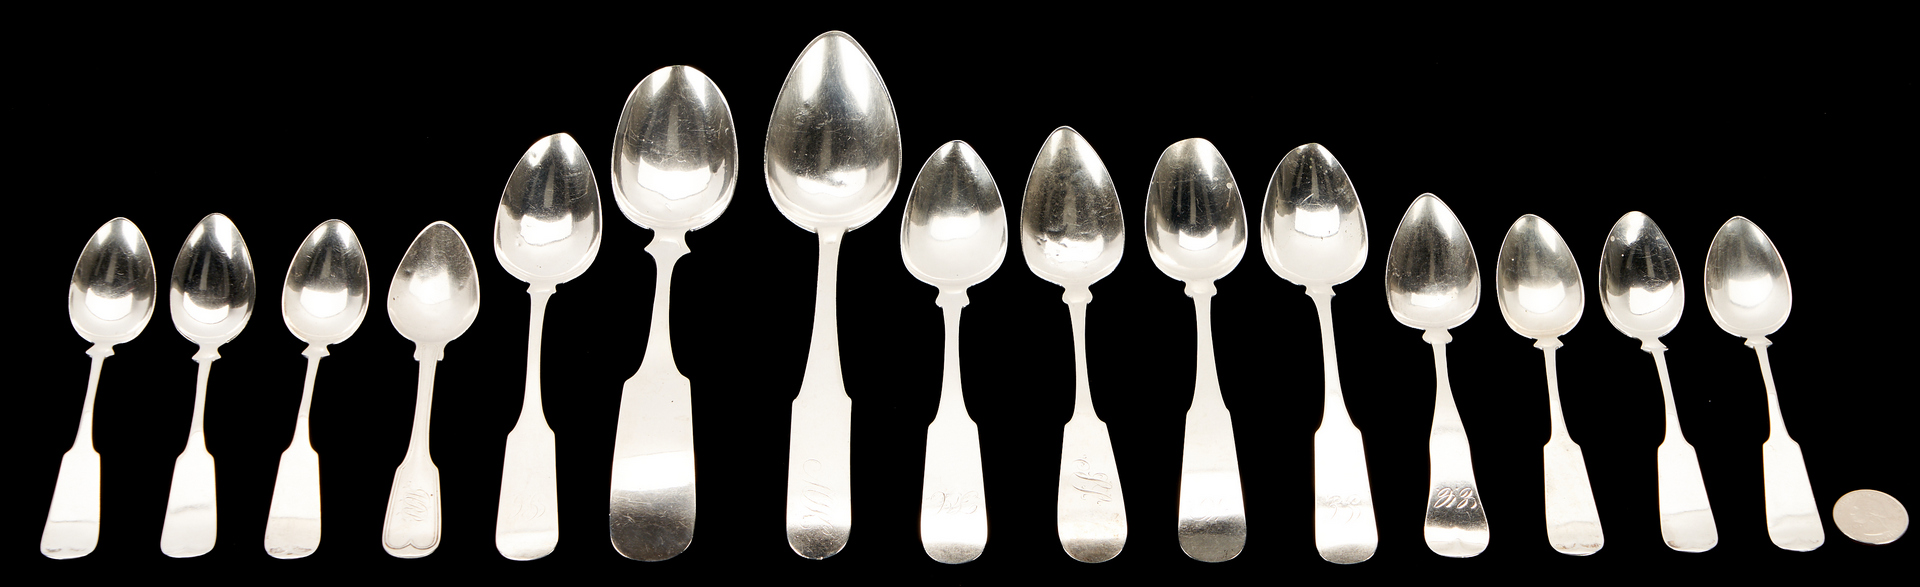 Lot 772: 15 Coin Silver and Sterling Spoons incl. Asa Blanchard, Kentucky